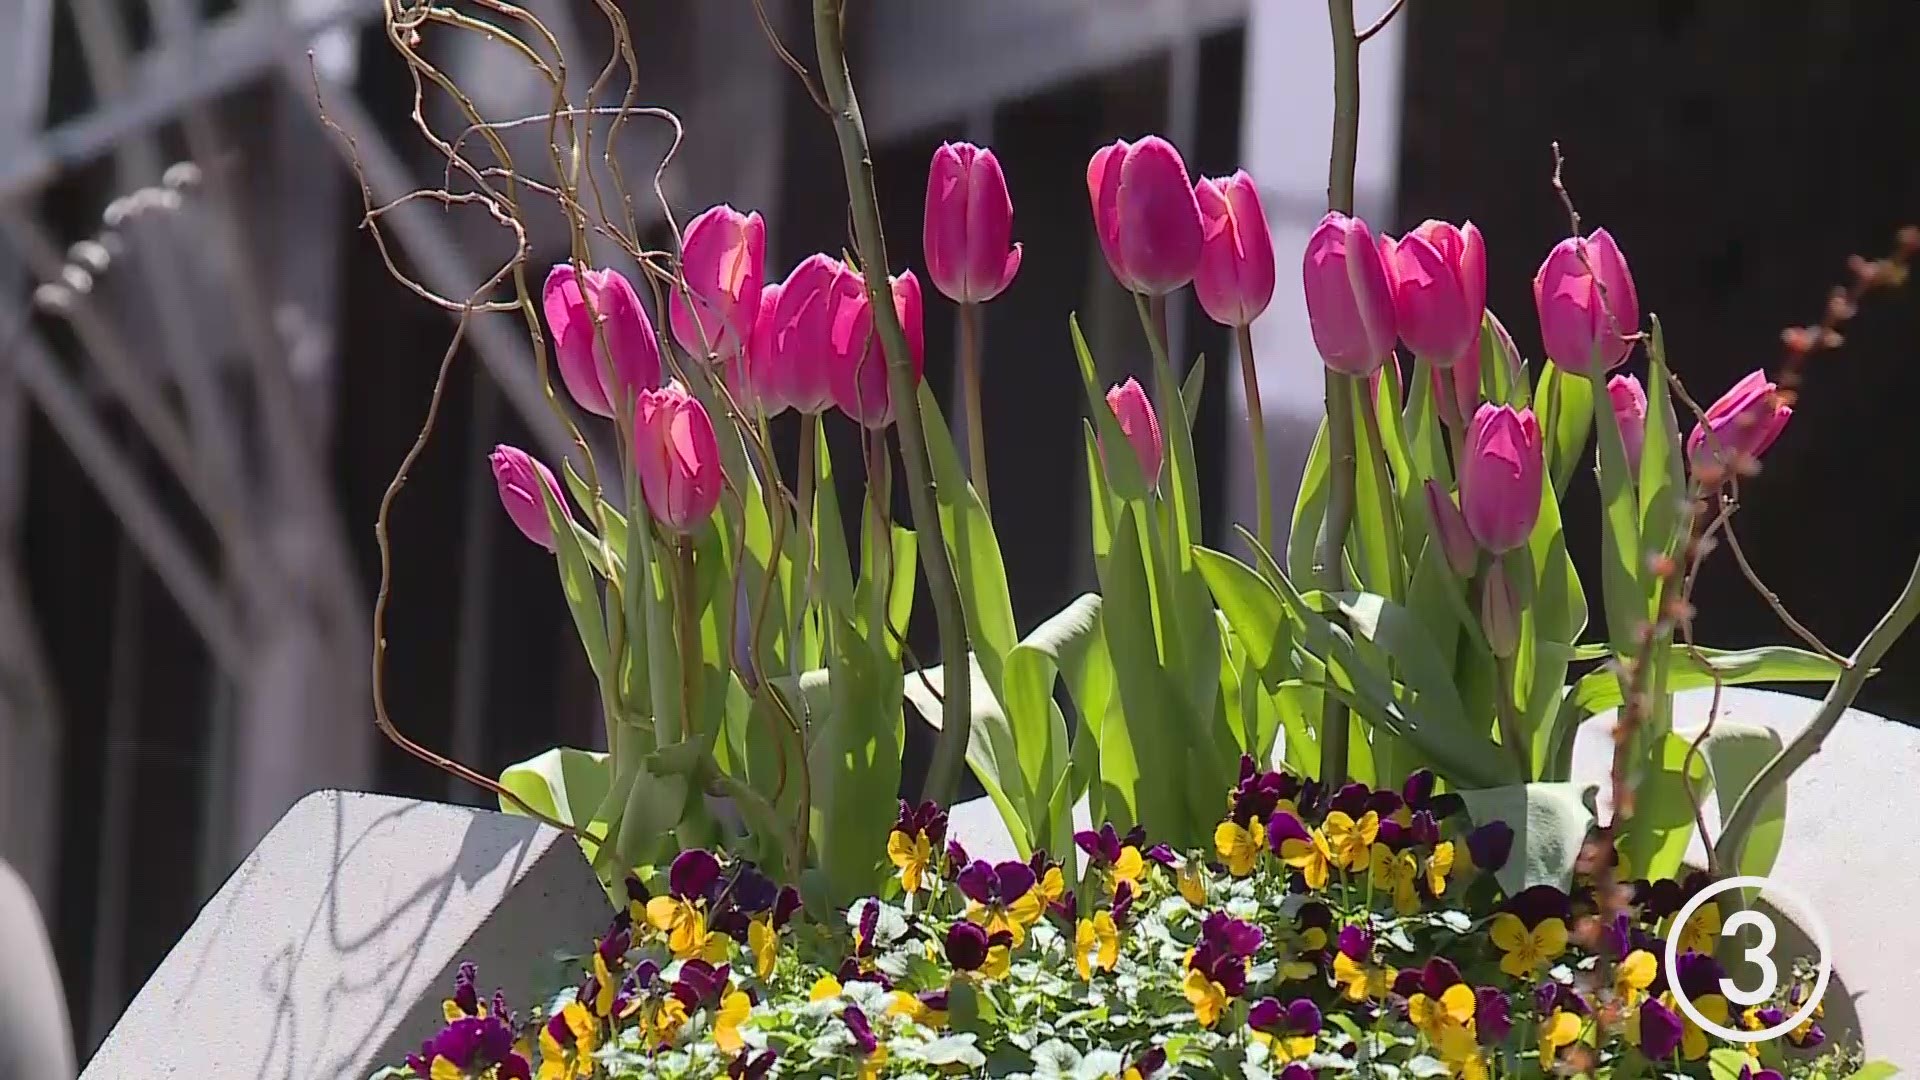 Enjoy a look at some of the beautiful flowers at Playhouse Square in downtown Cleveland. #3weather